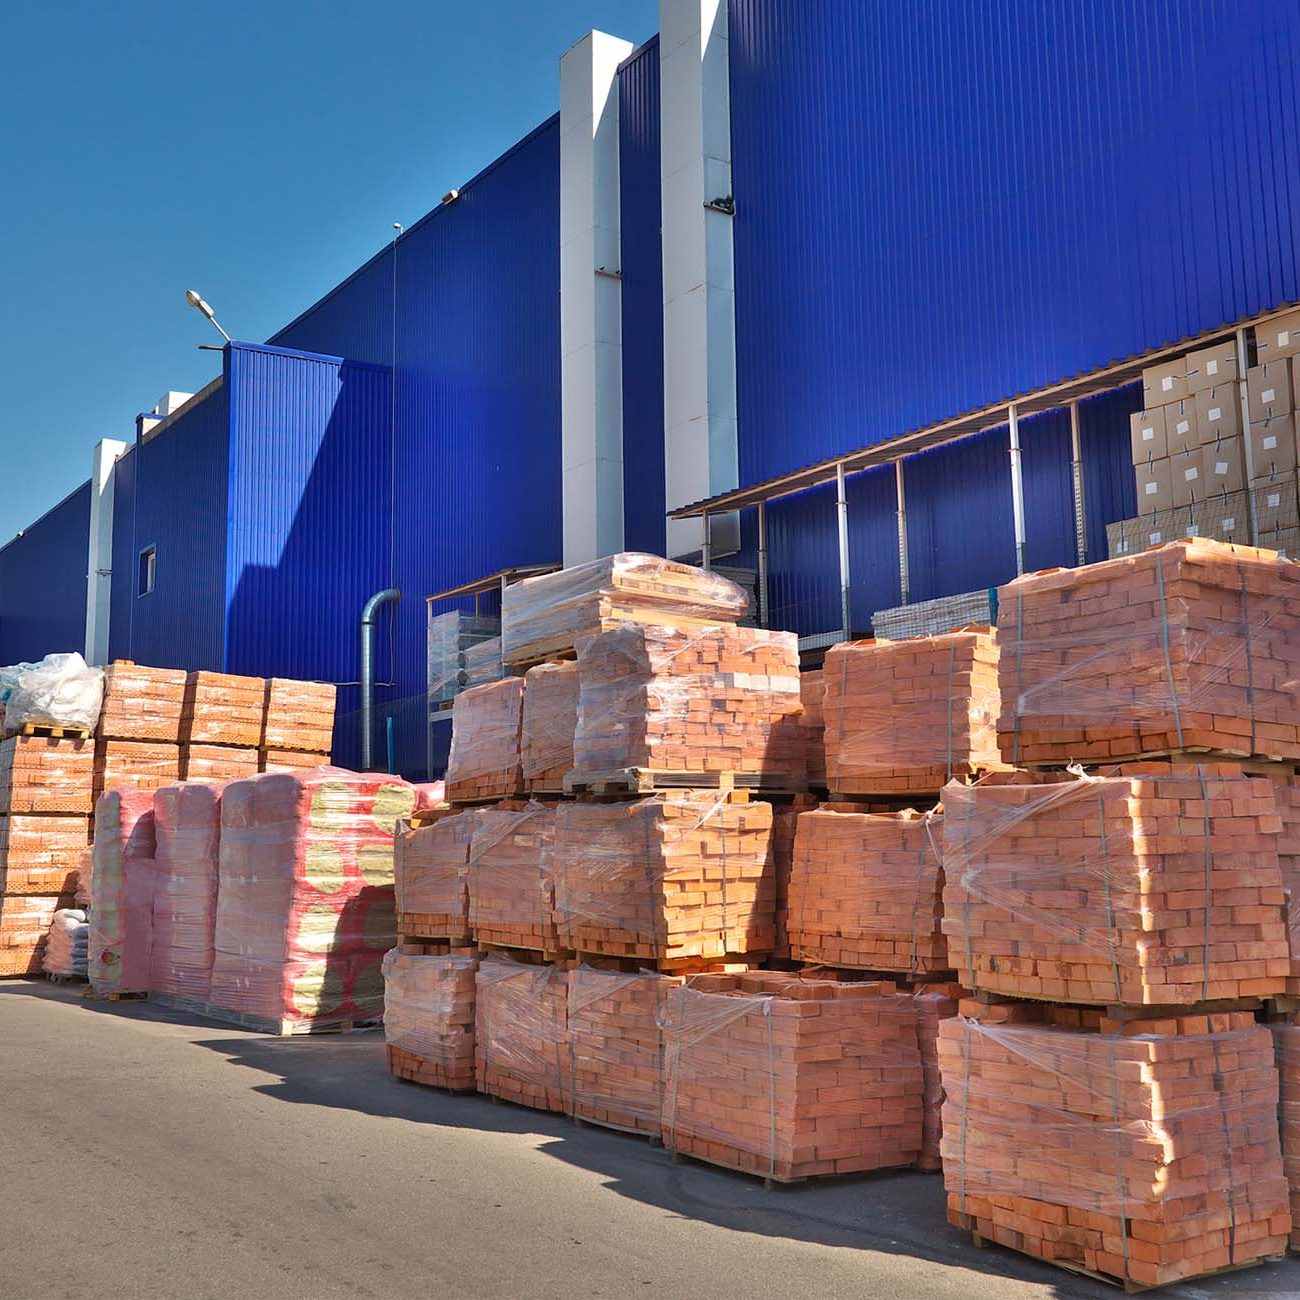 Construction materials stacked near the warehouse